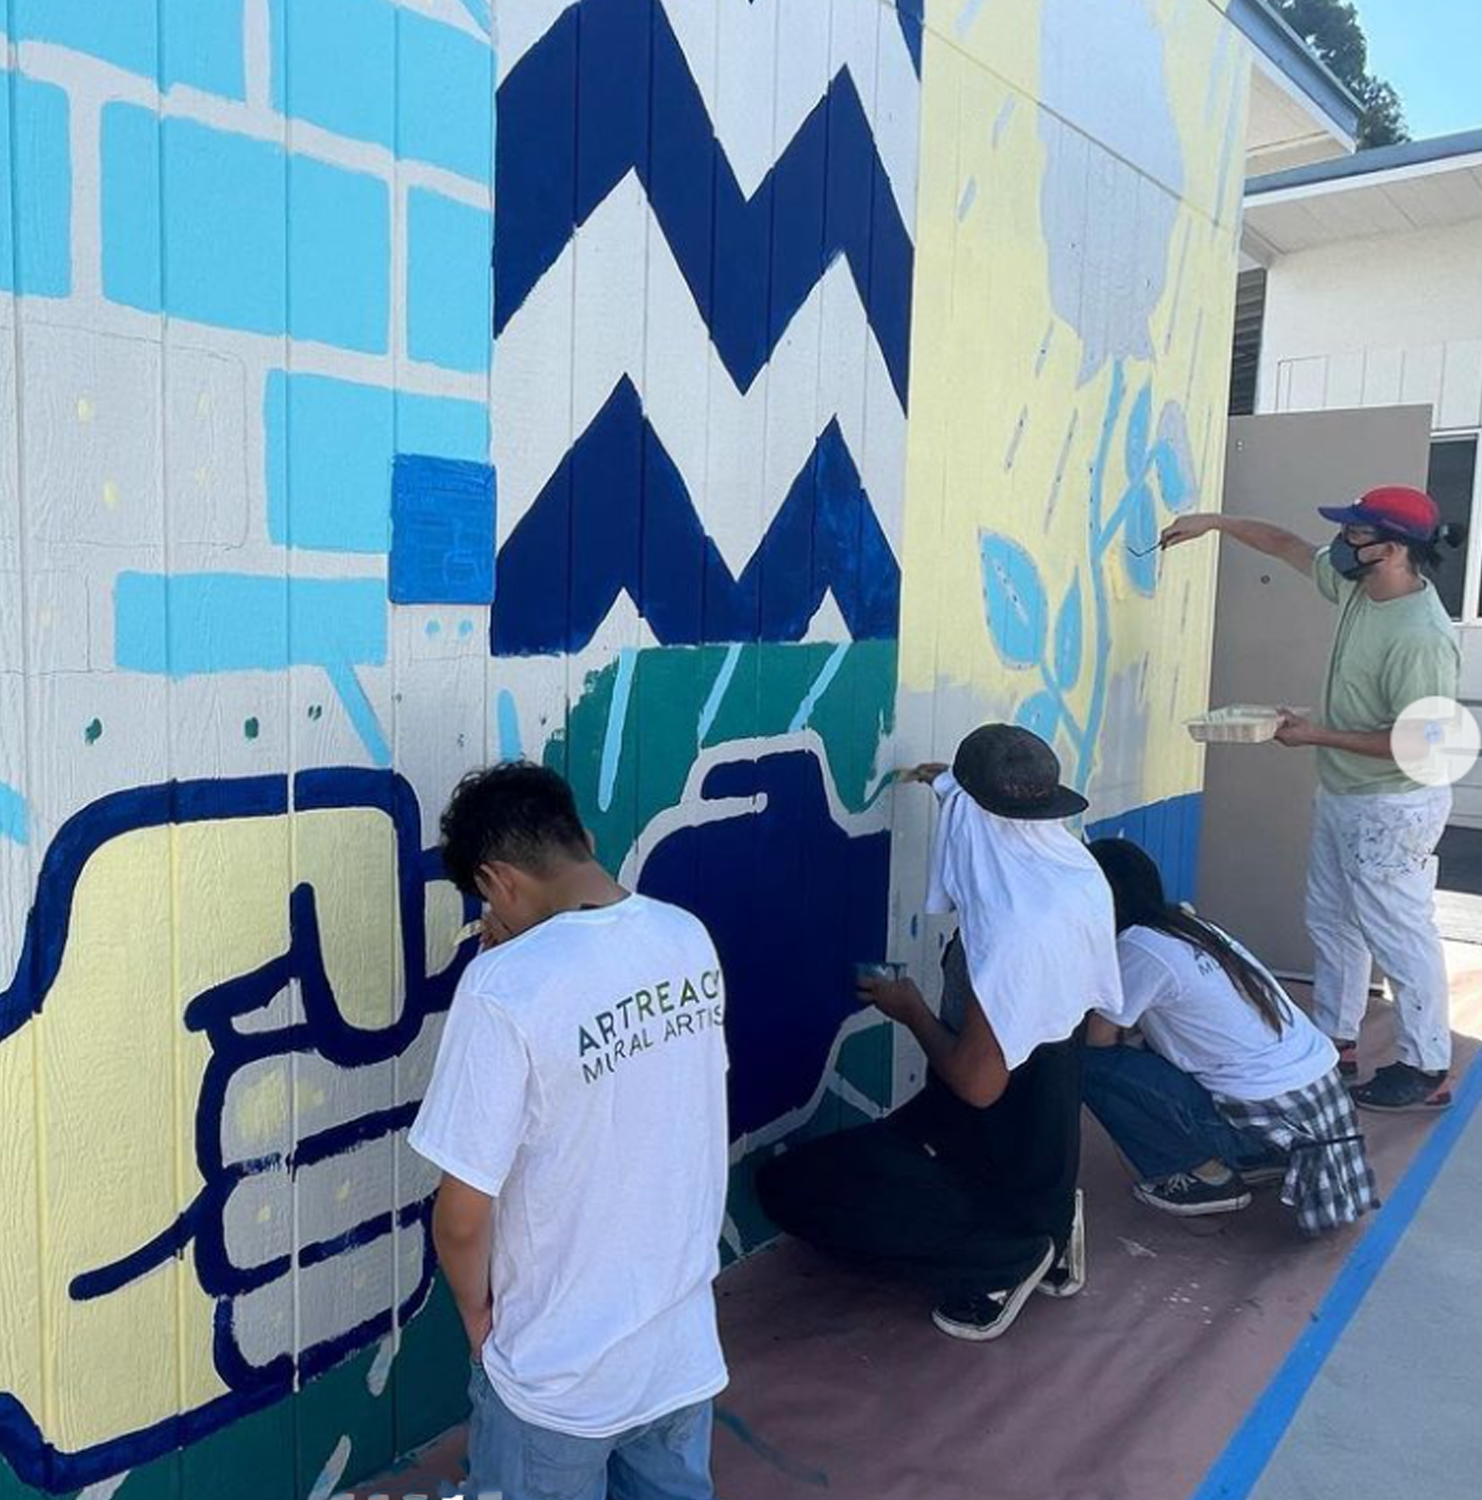 4 people painting mural for Artreach San Diego